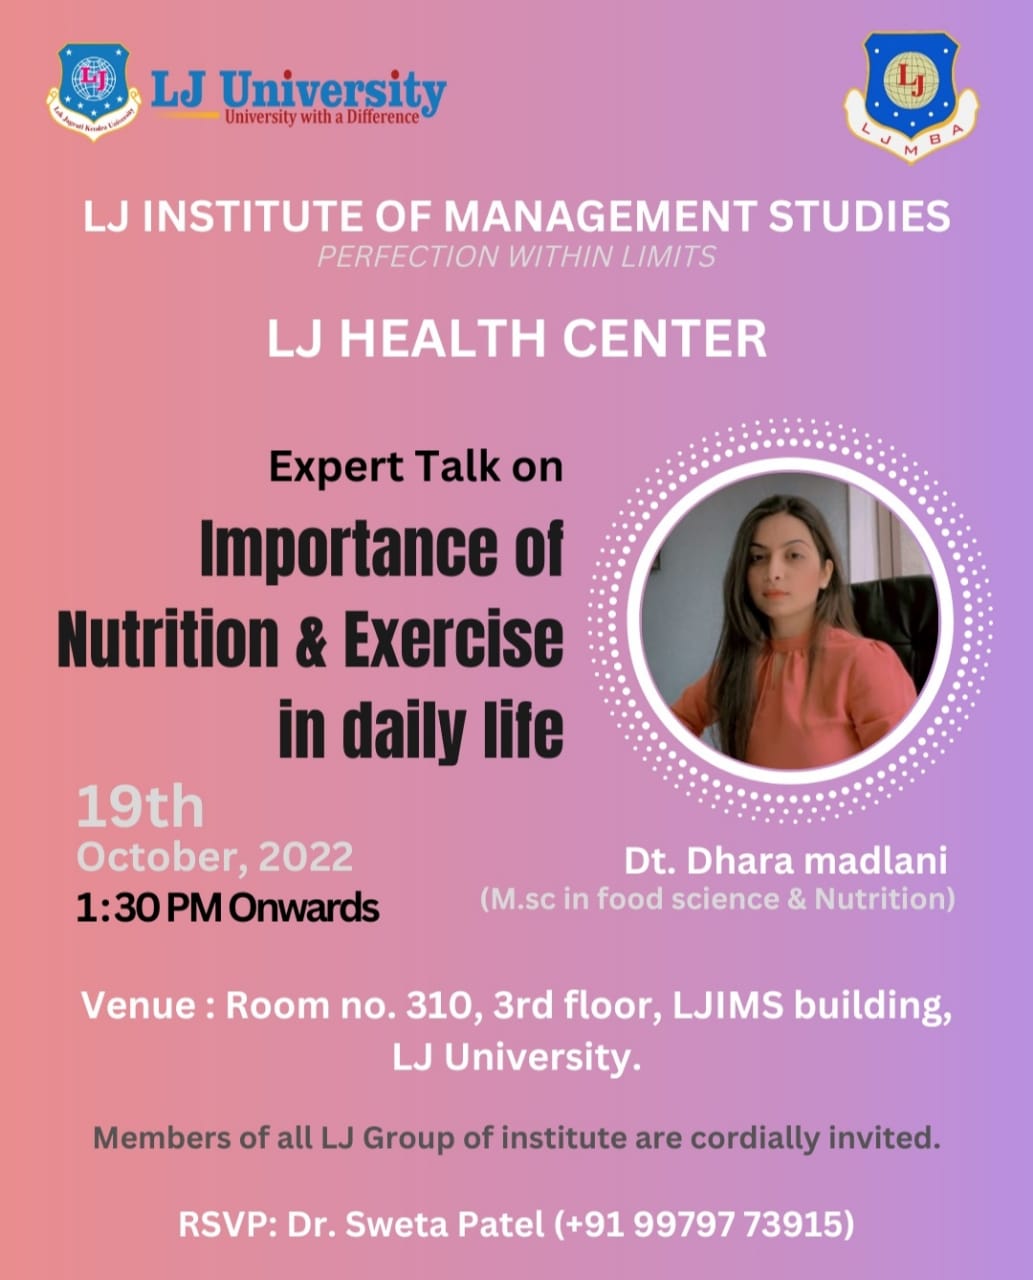 Expert Talk on Importance of Nutrition & Exercise in Daily life